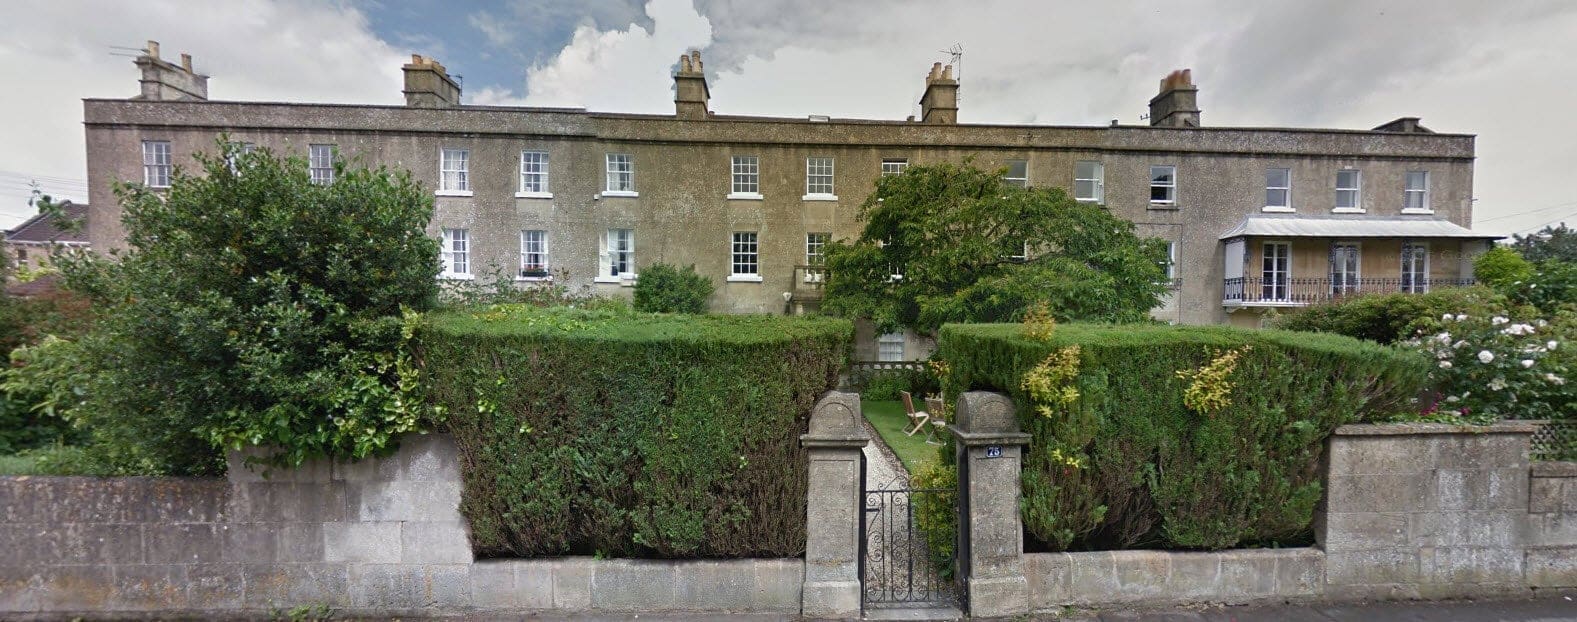 Isabella Place, Combe Down